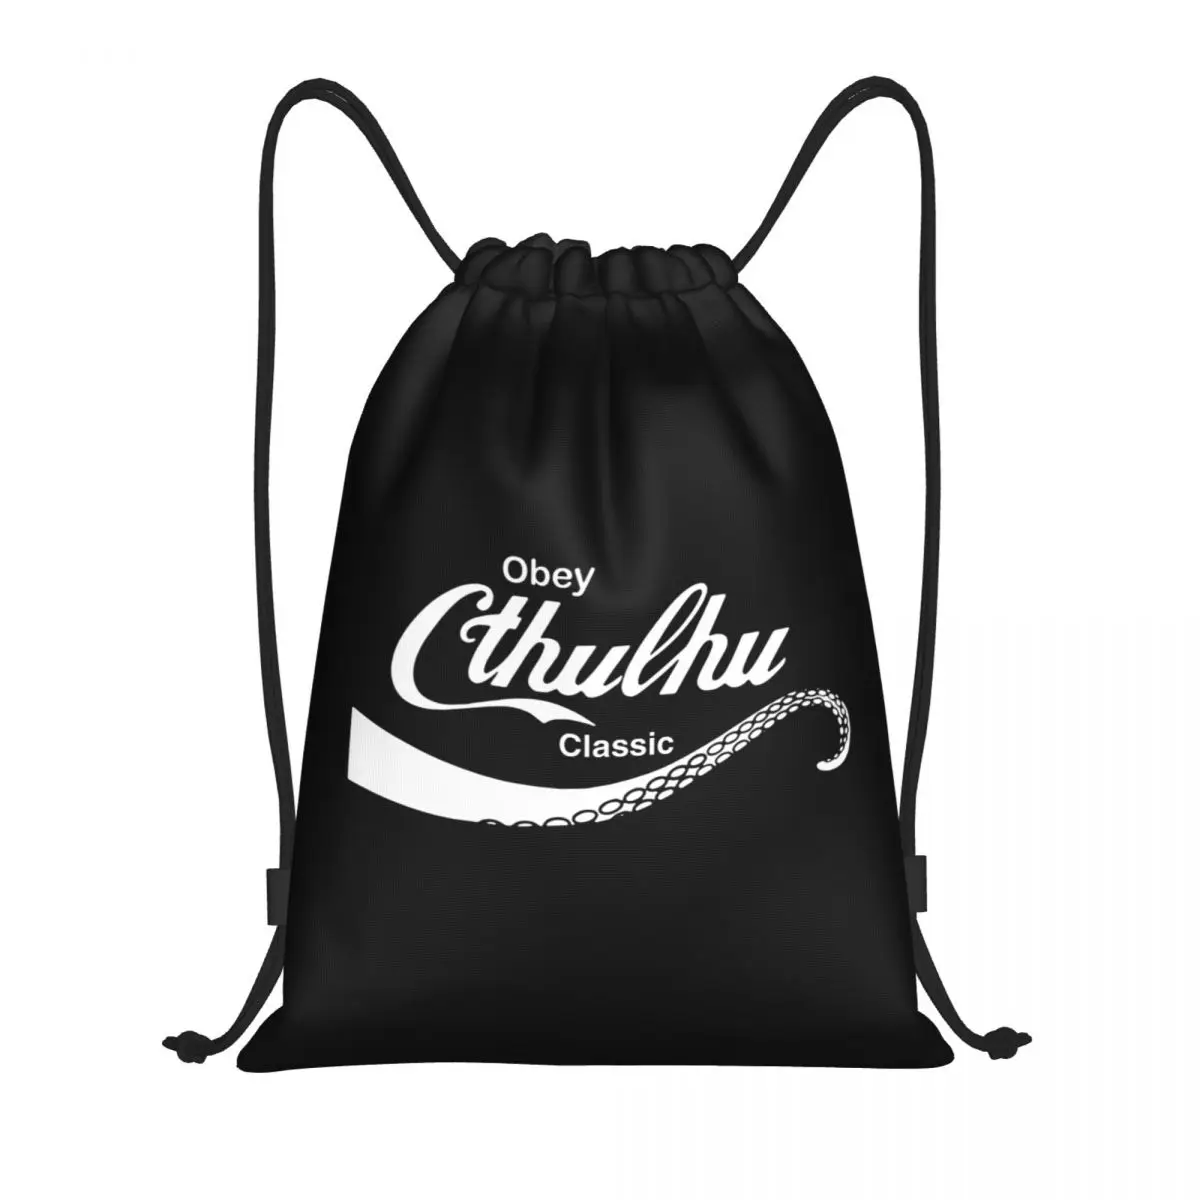 

Fashion Brand Call Of Cthulhu Funny Drawstring Backpack Women Men Gym Sport Sackpack Foldable Lovecraft Training Bag Sack